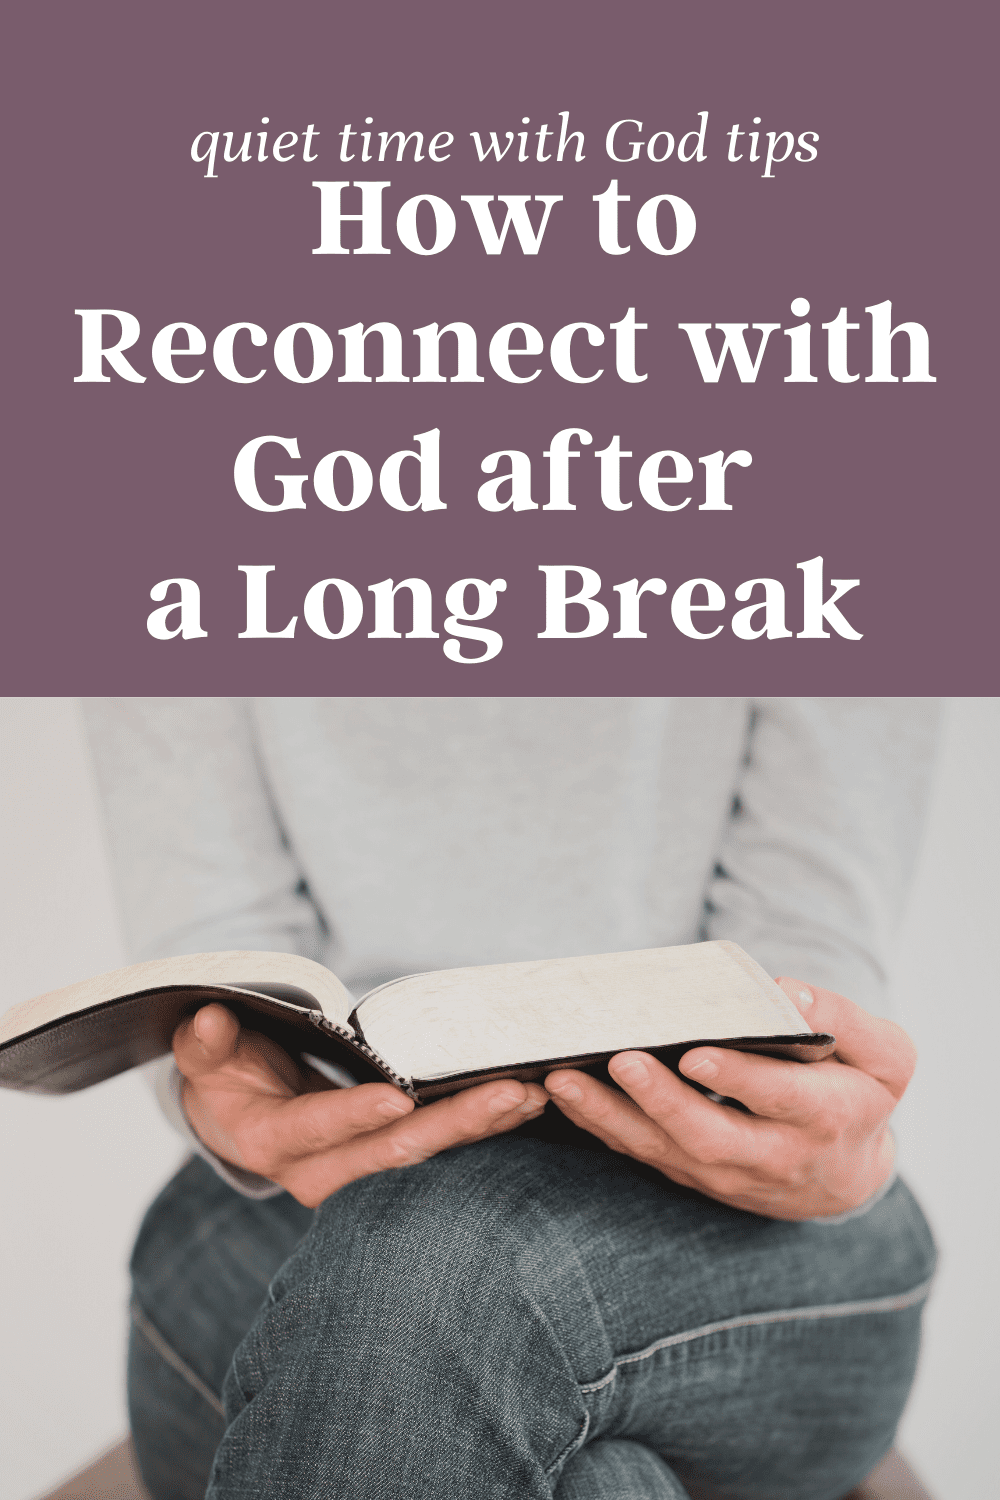 Are you ready to reconnect with God after a long (or short) time away? Learn how you can work your way back to a close relationship with God through consistent quiet times no matter how long it's been since you spent time in prayer or bible study.